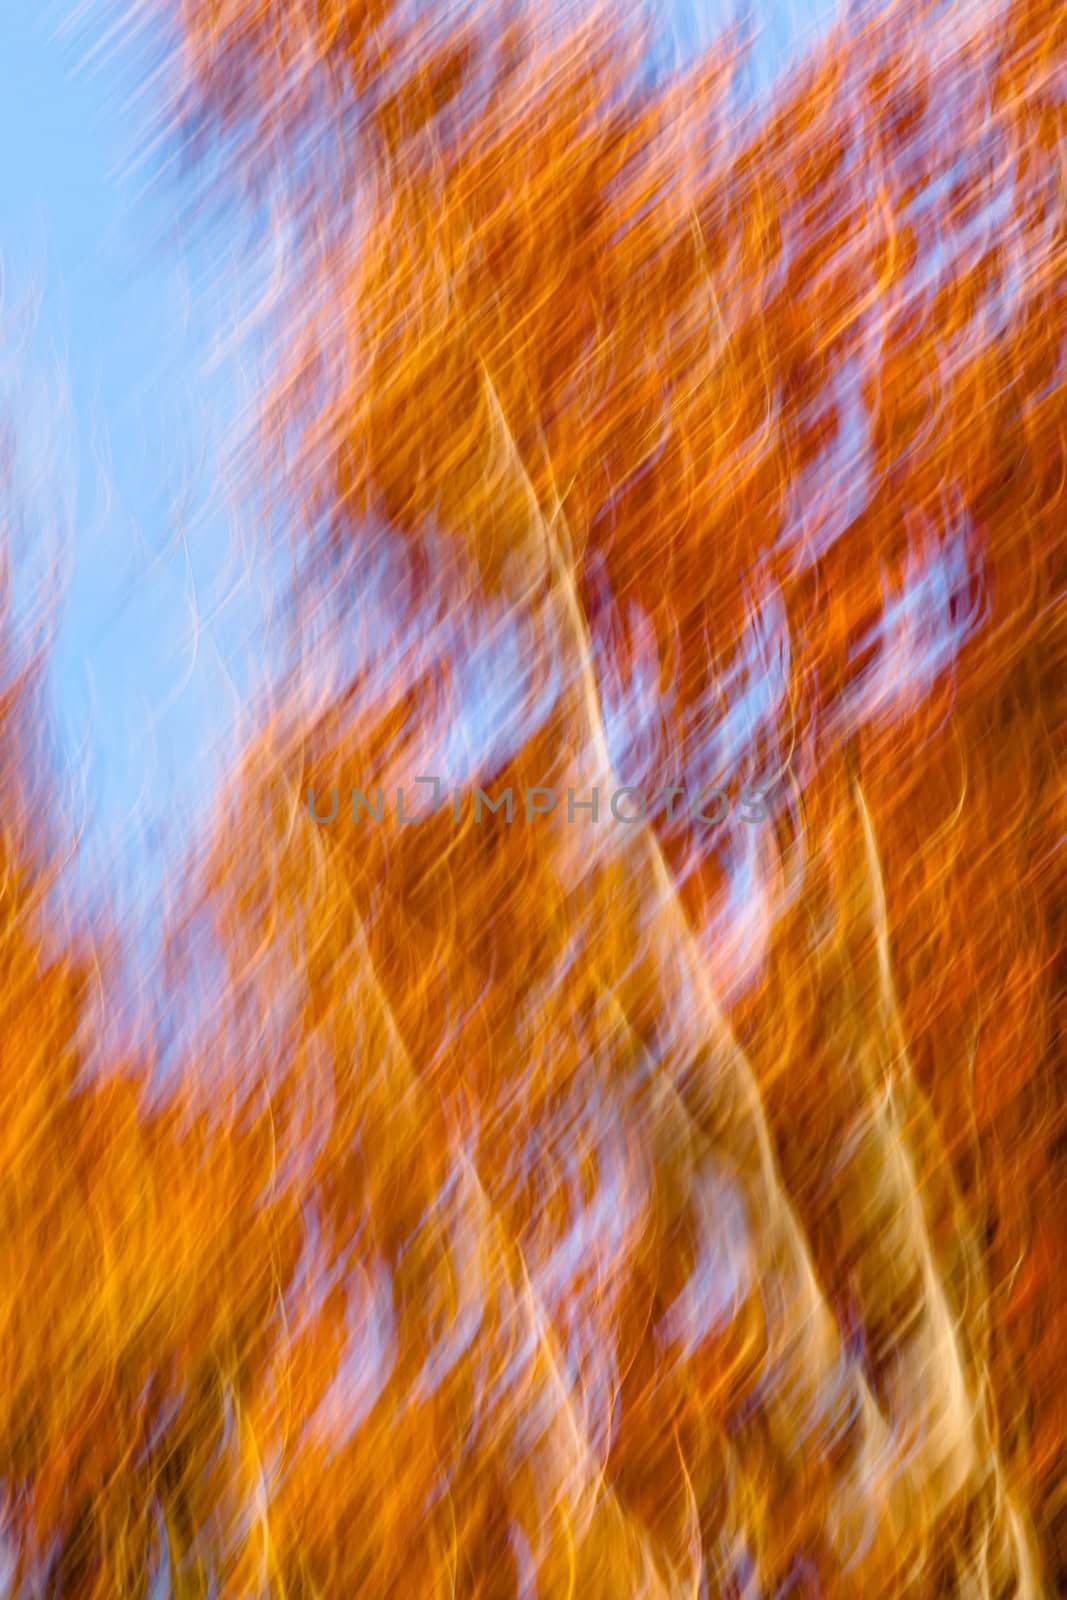 Abstract motion blur of trees in an autumn forest